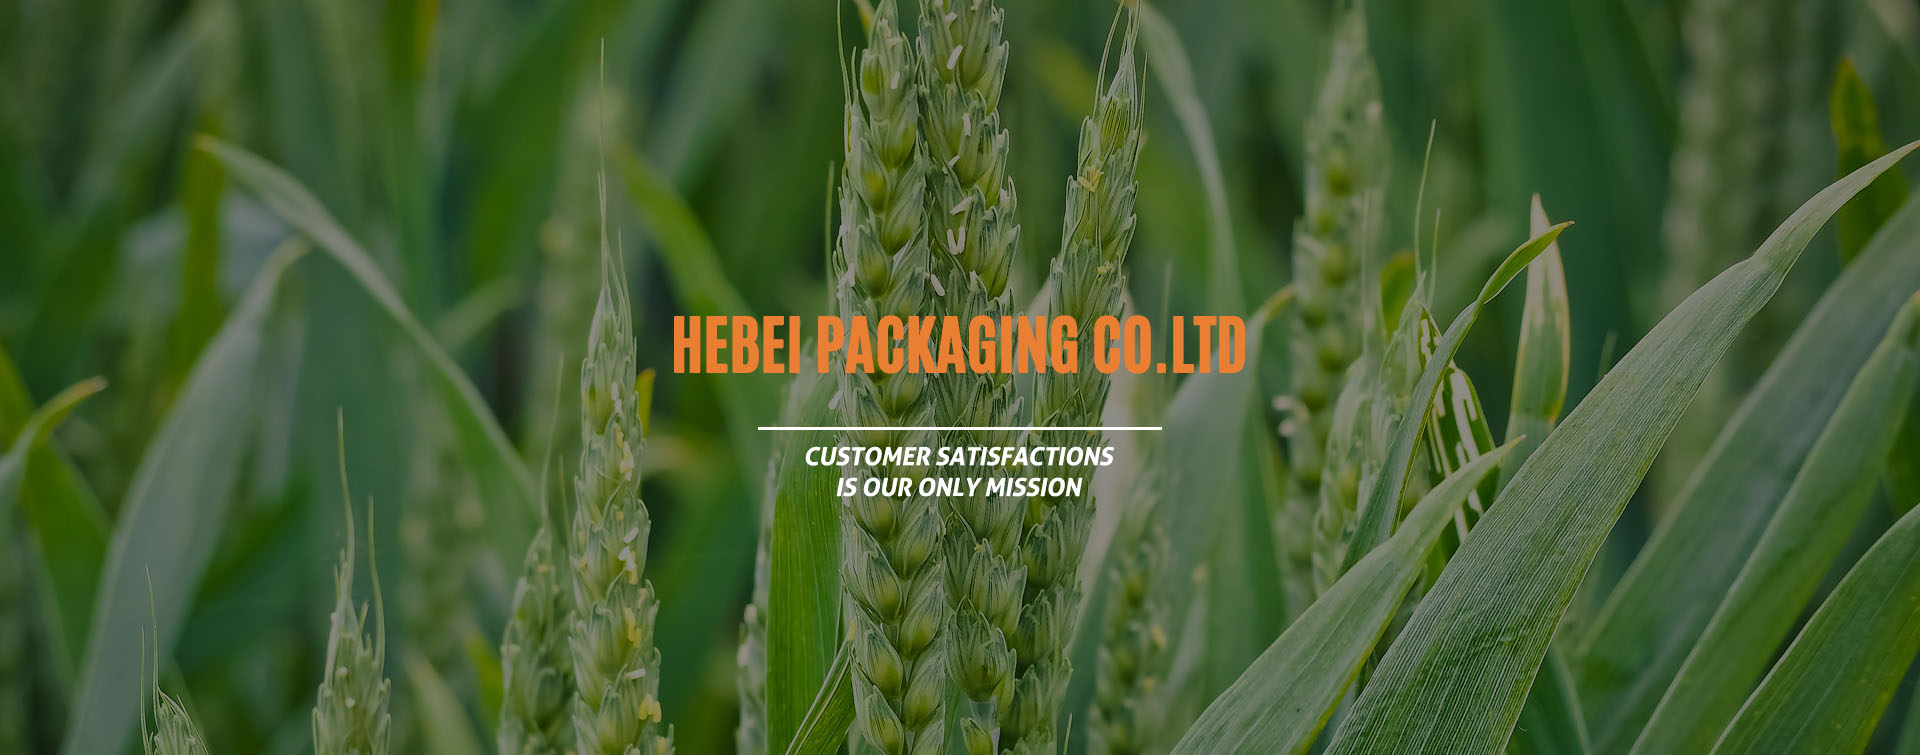 Compound packaging products  industry famous enterprises